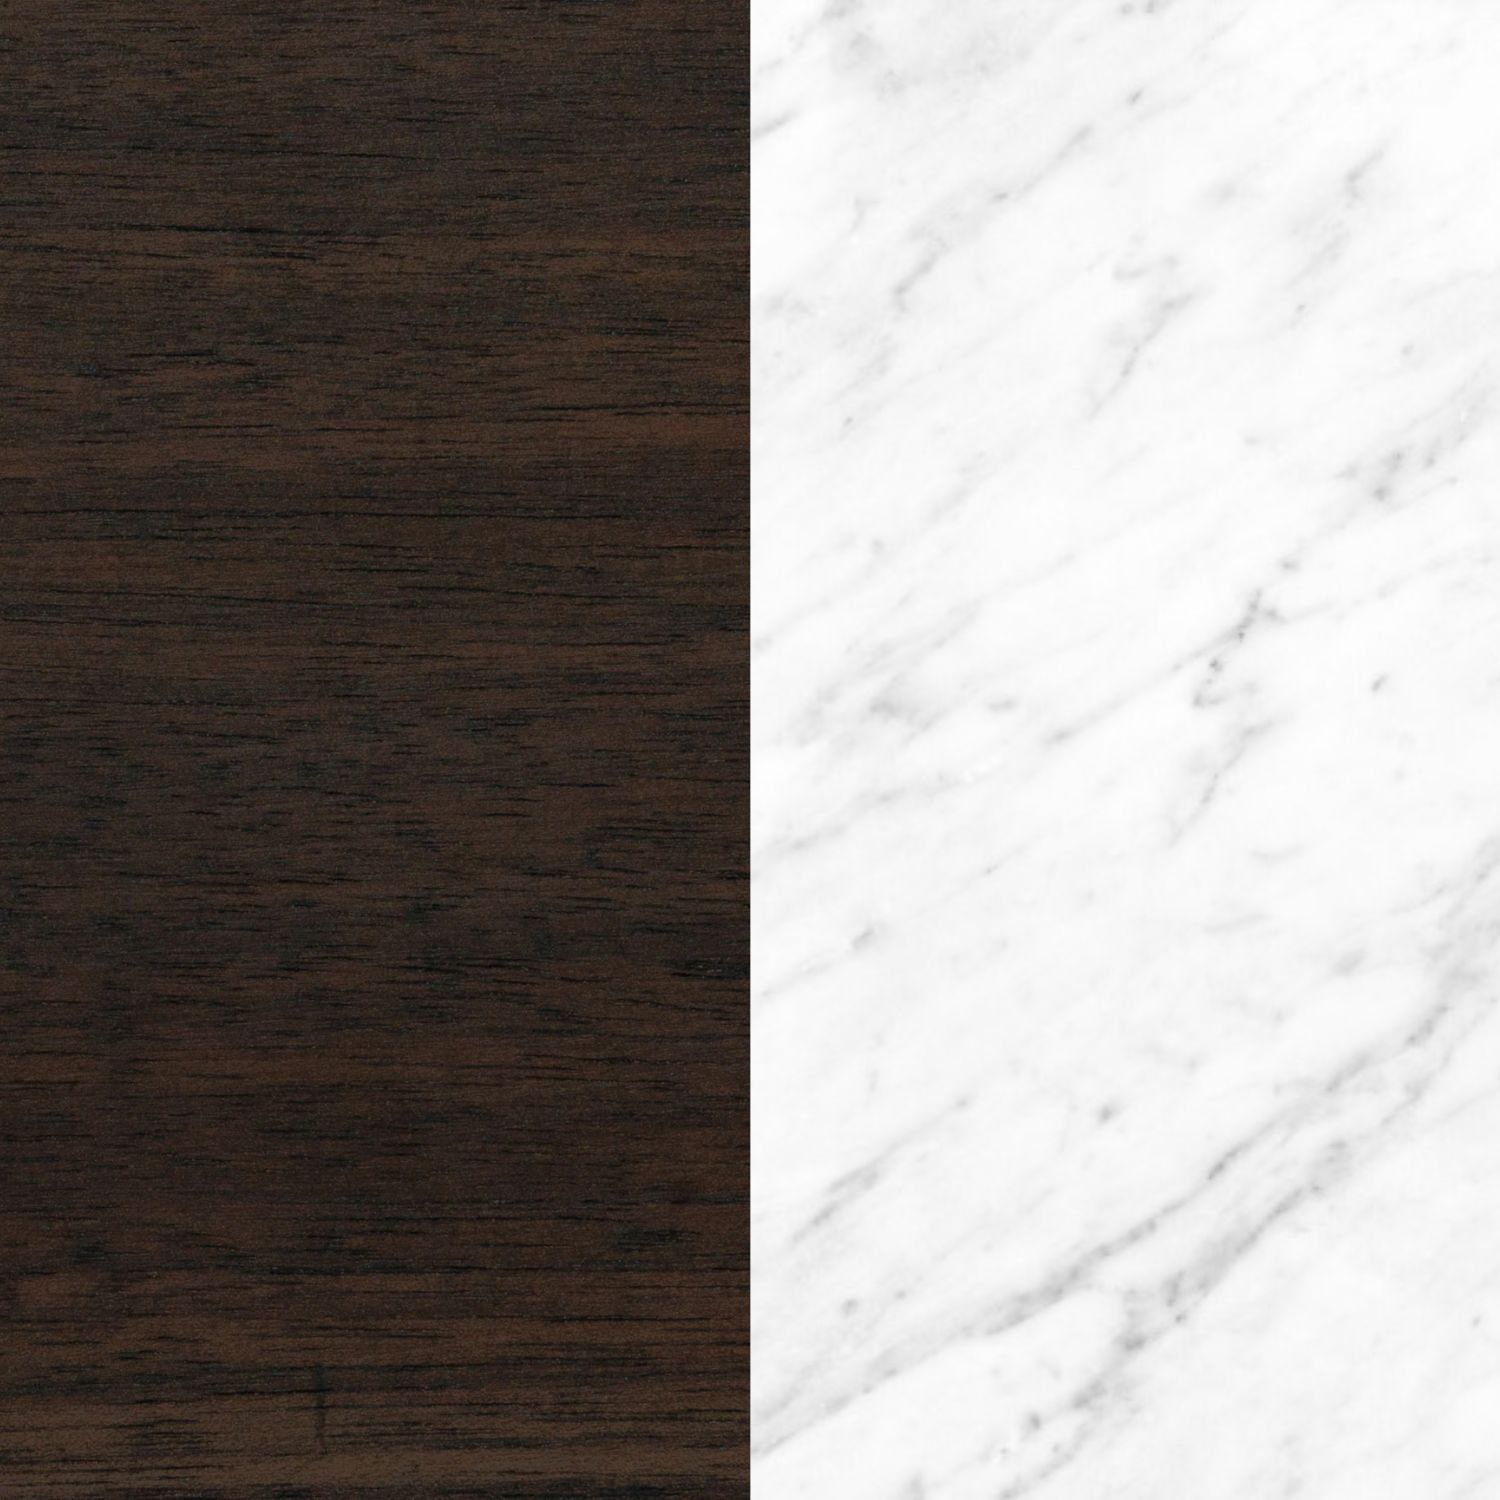 Roasted Coffee / White Marble